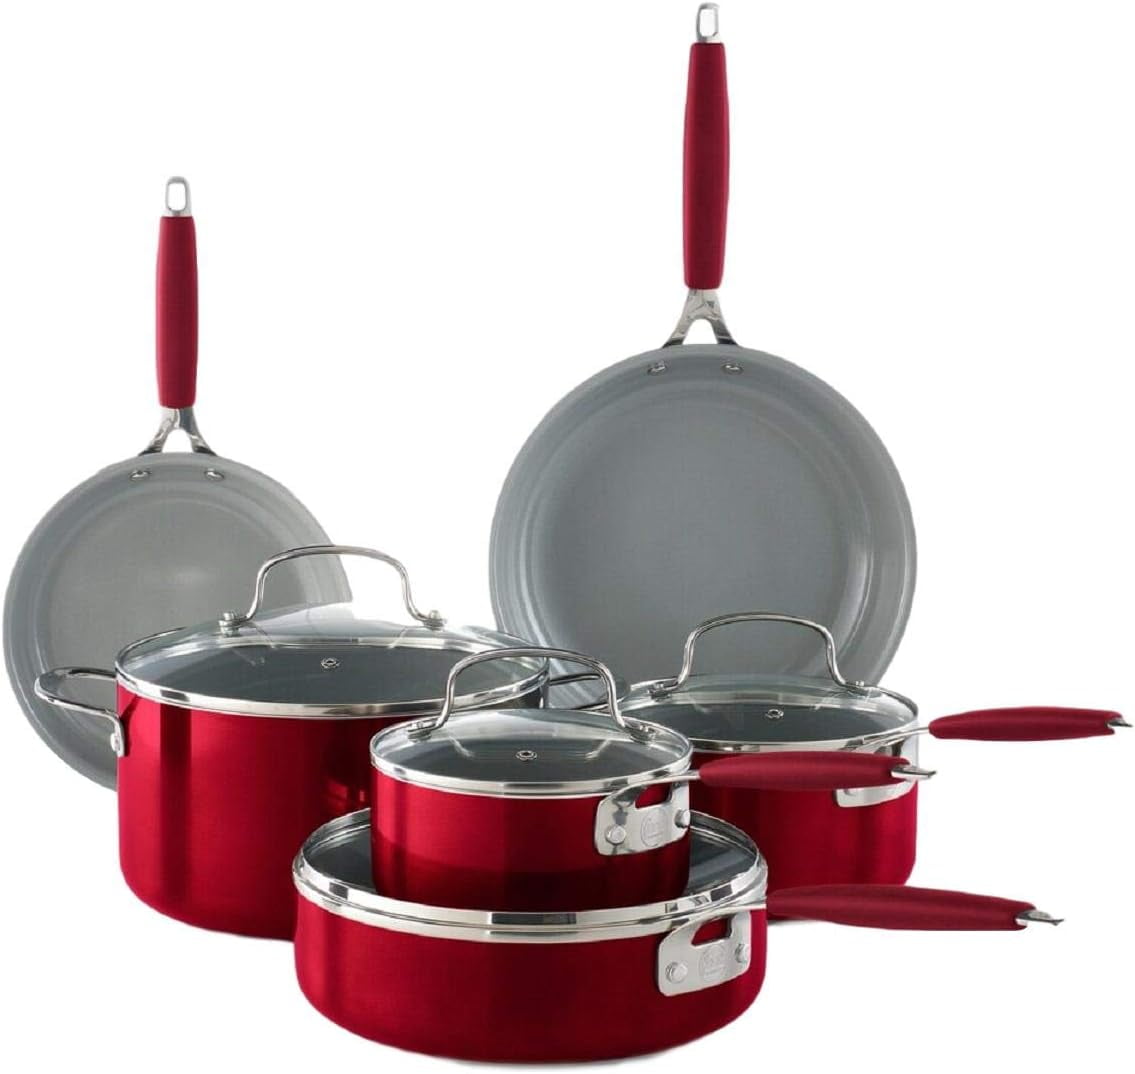 16pc Healthy Ceramic Nonstick Cookware Set w/ Induction Compatible Bas —  SkyMall